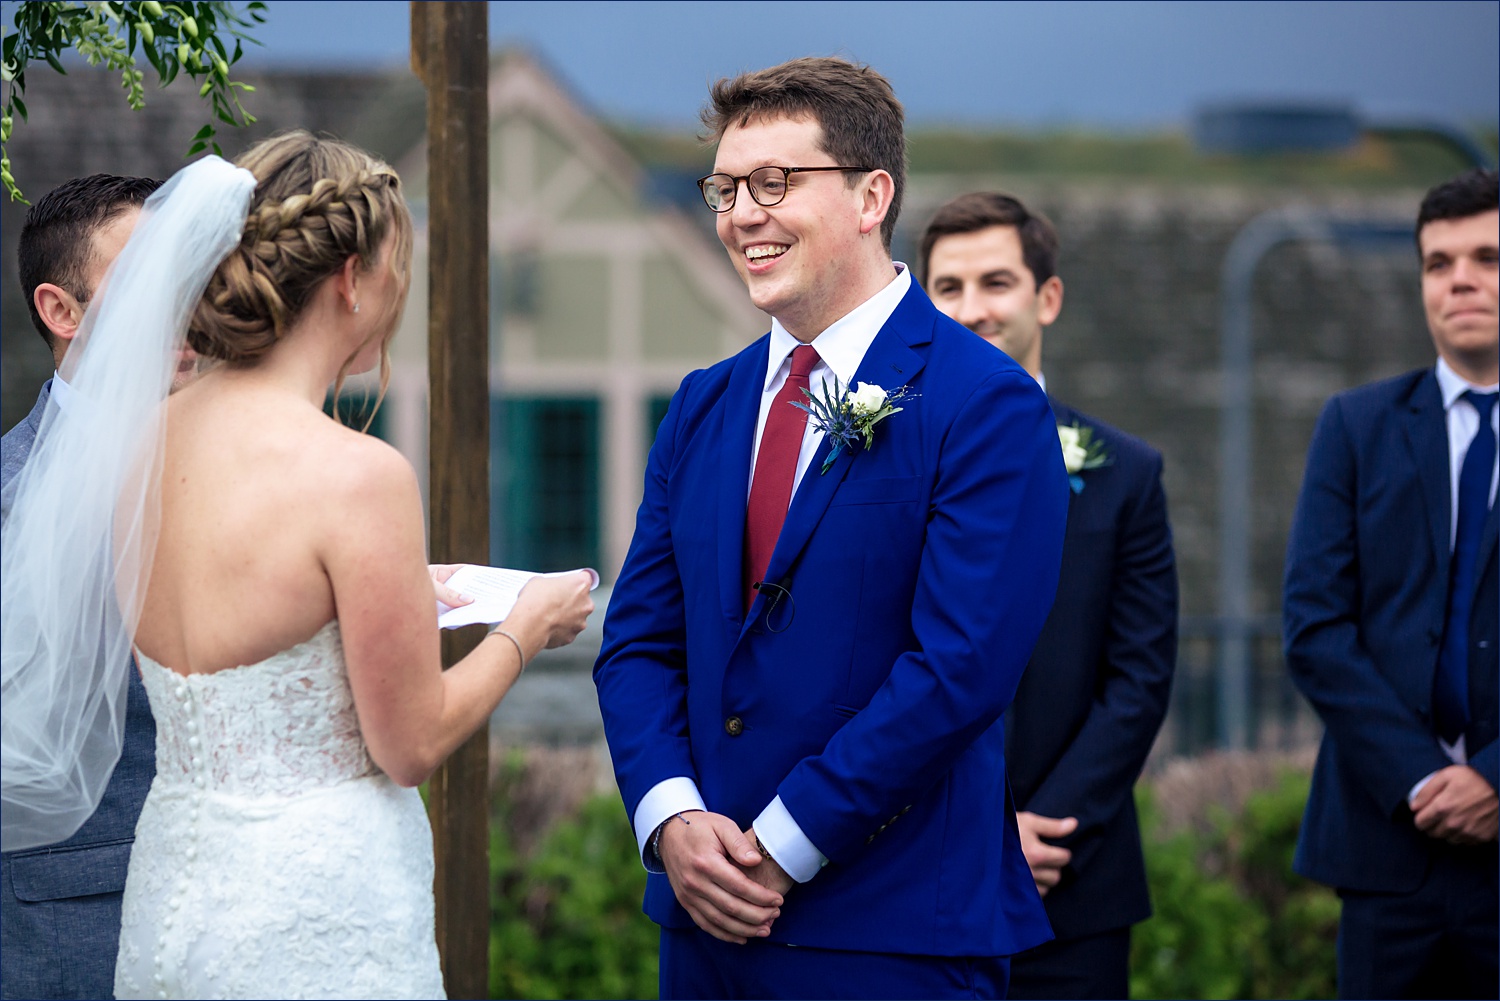 Smiling groom during the Maine wedding ceremony